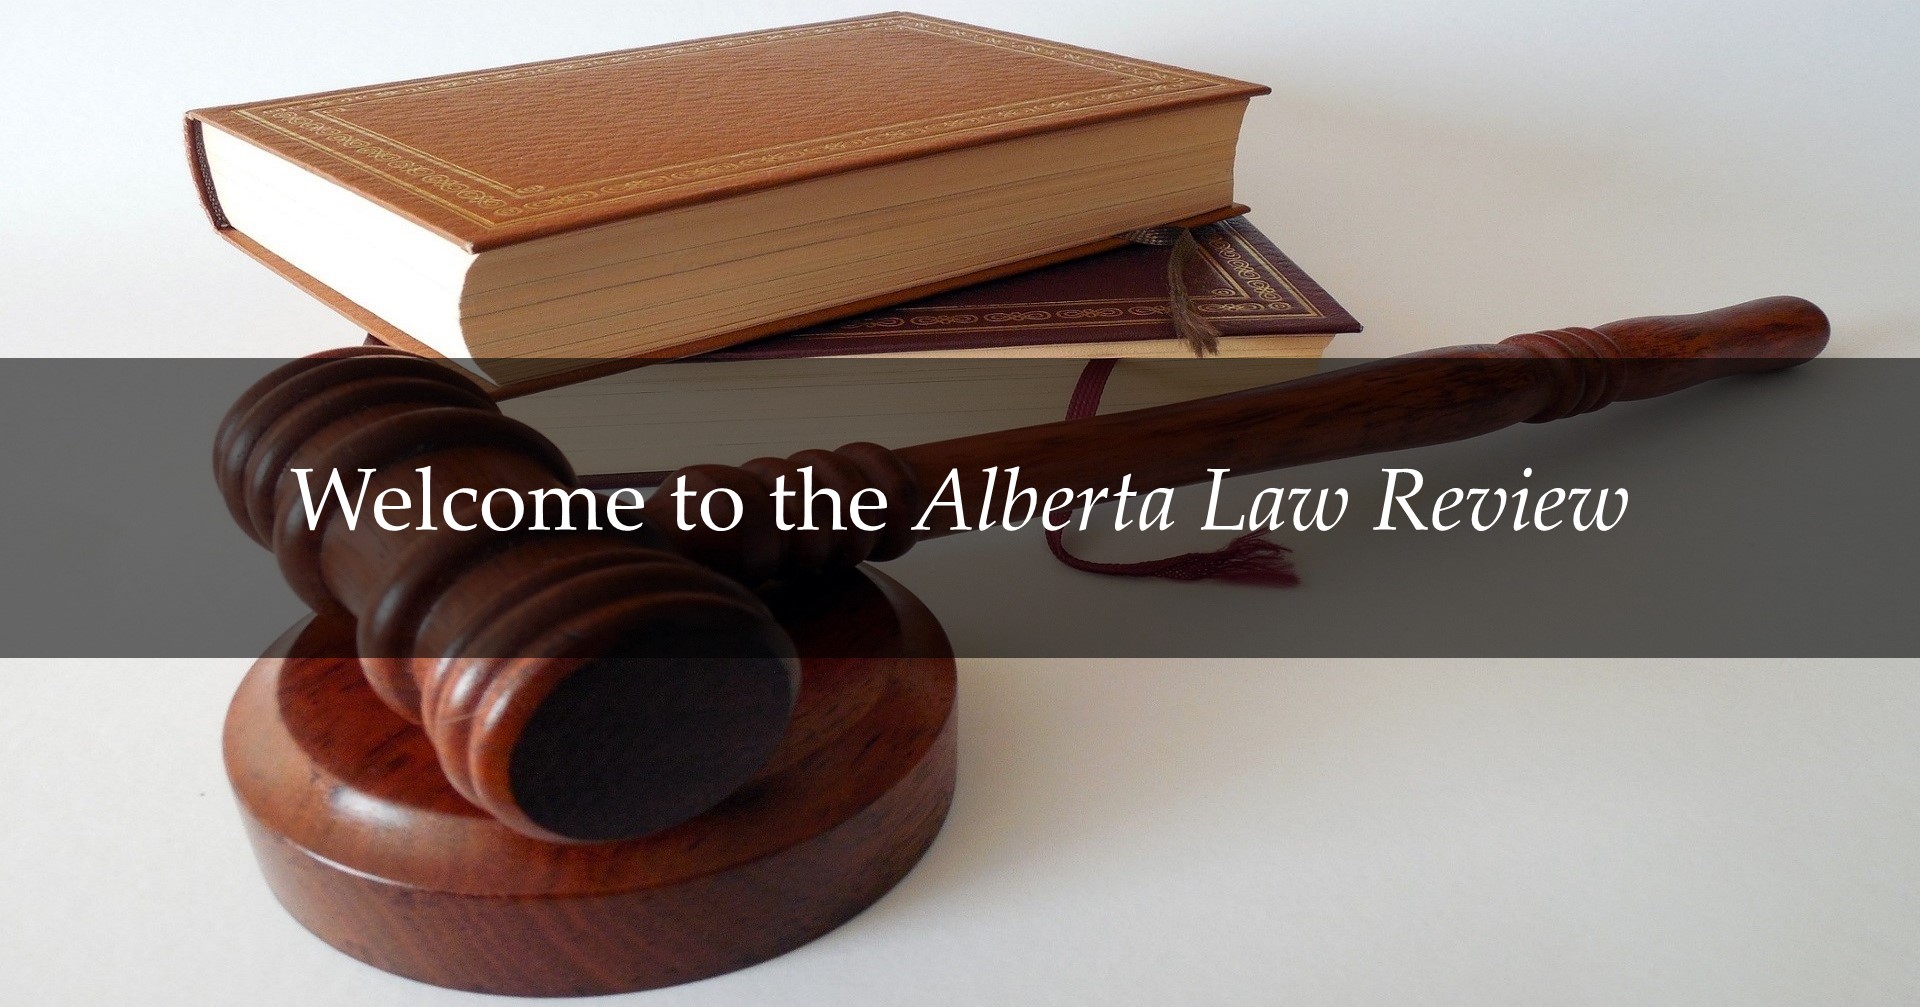 Welcome to the Alberta Law Review